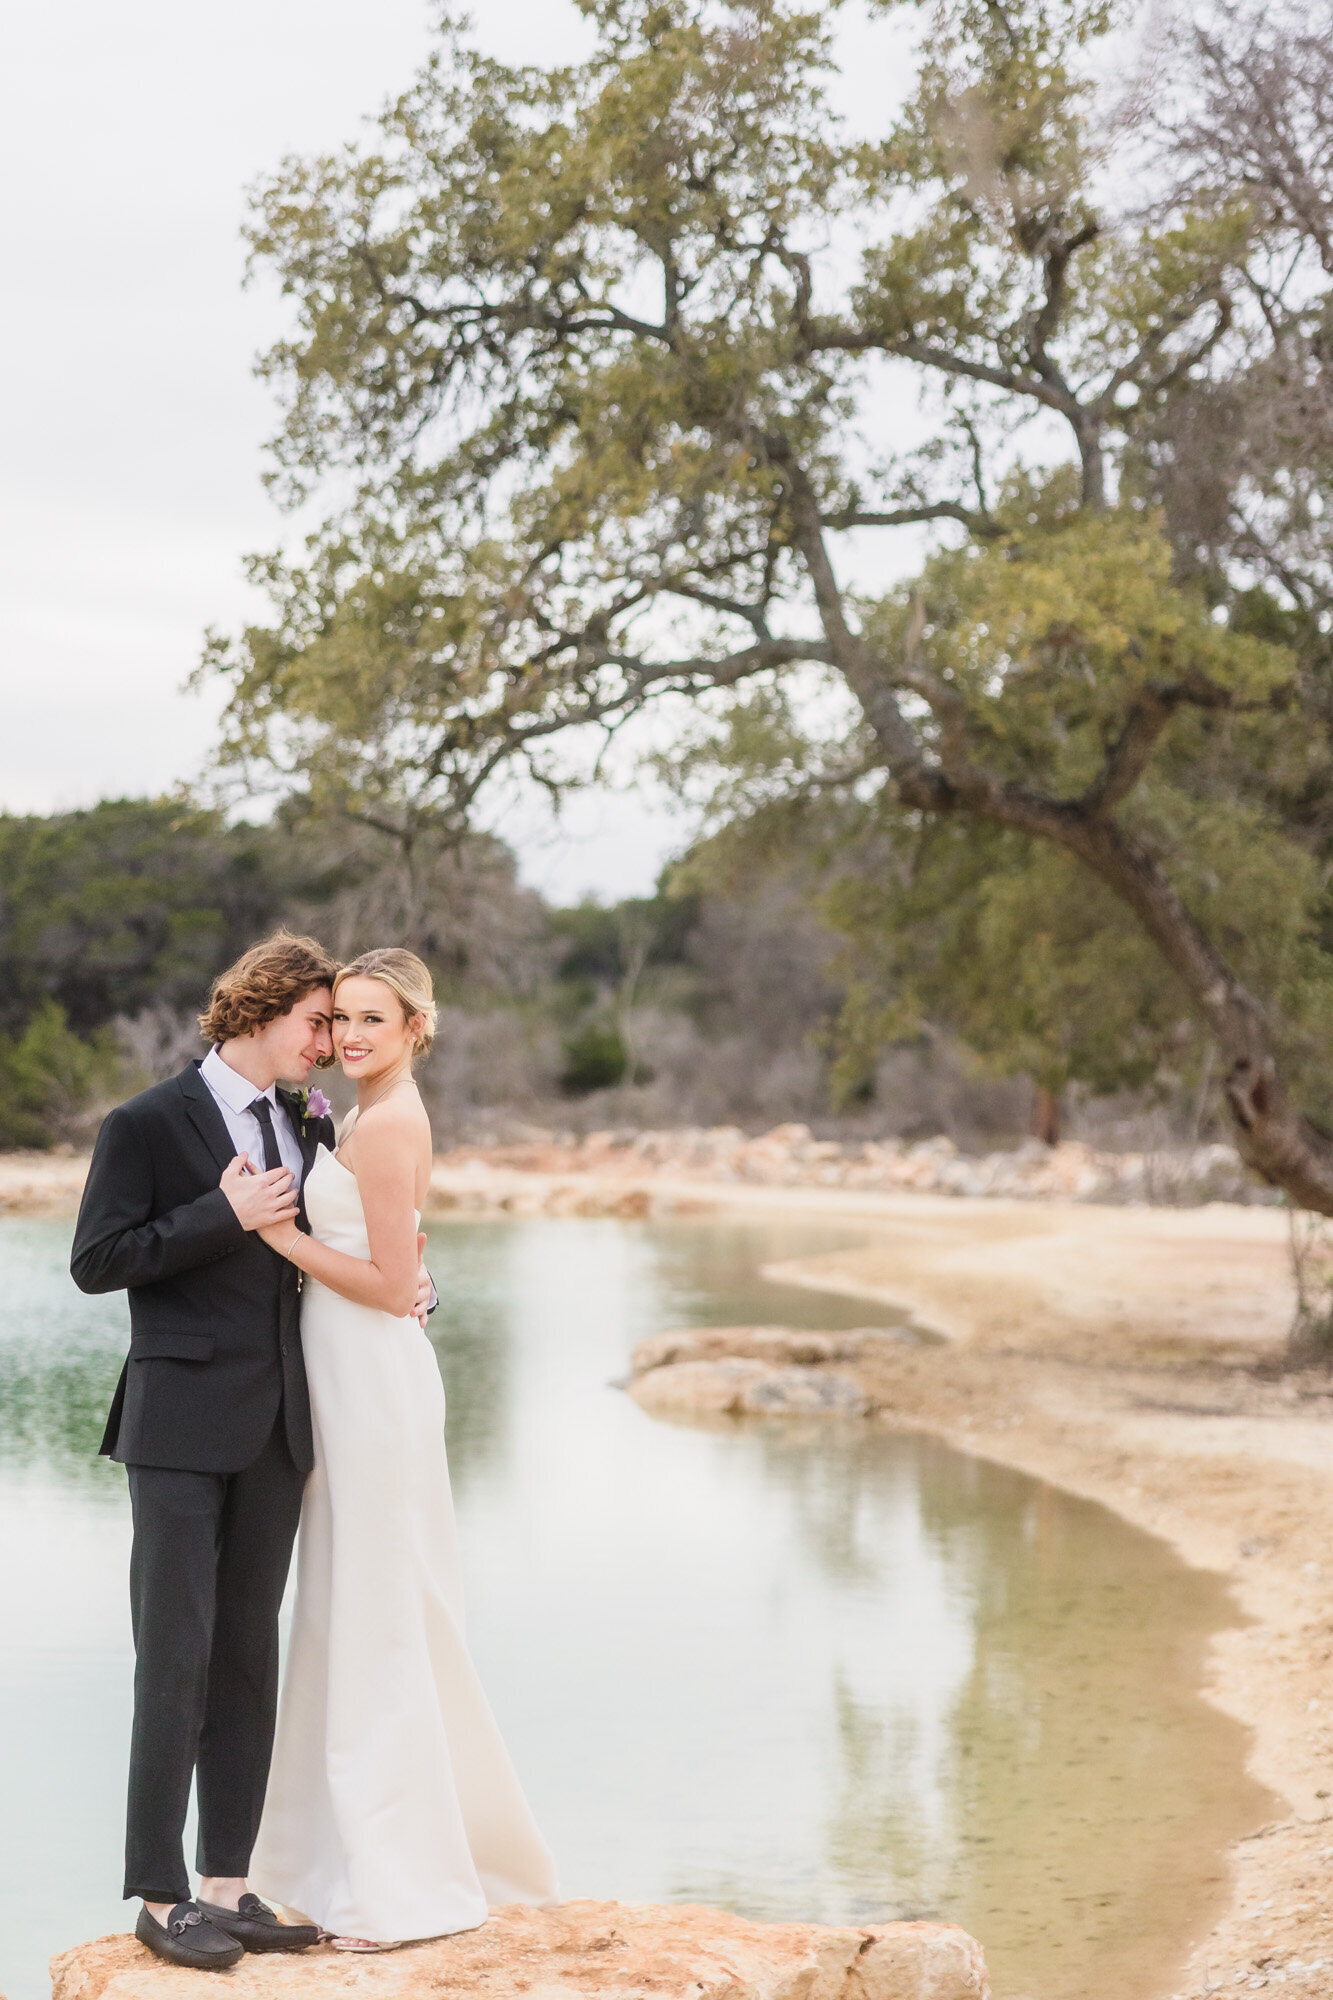 Bride and Groom Embrace at the Videre Estate wedding venue in Wimberley. Texas